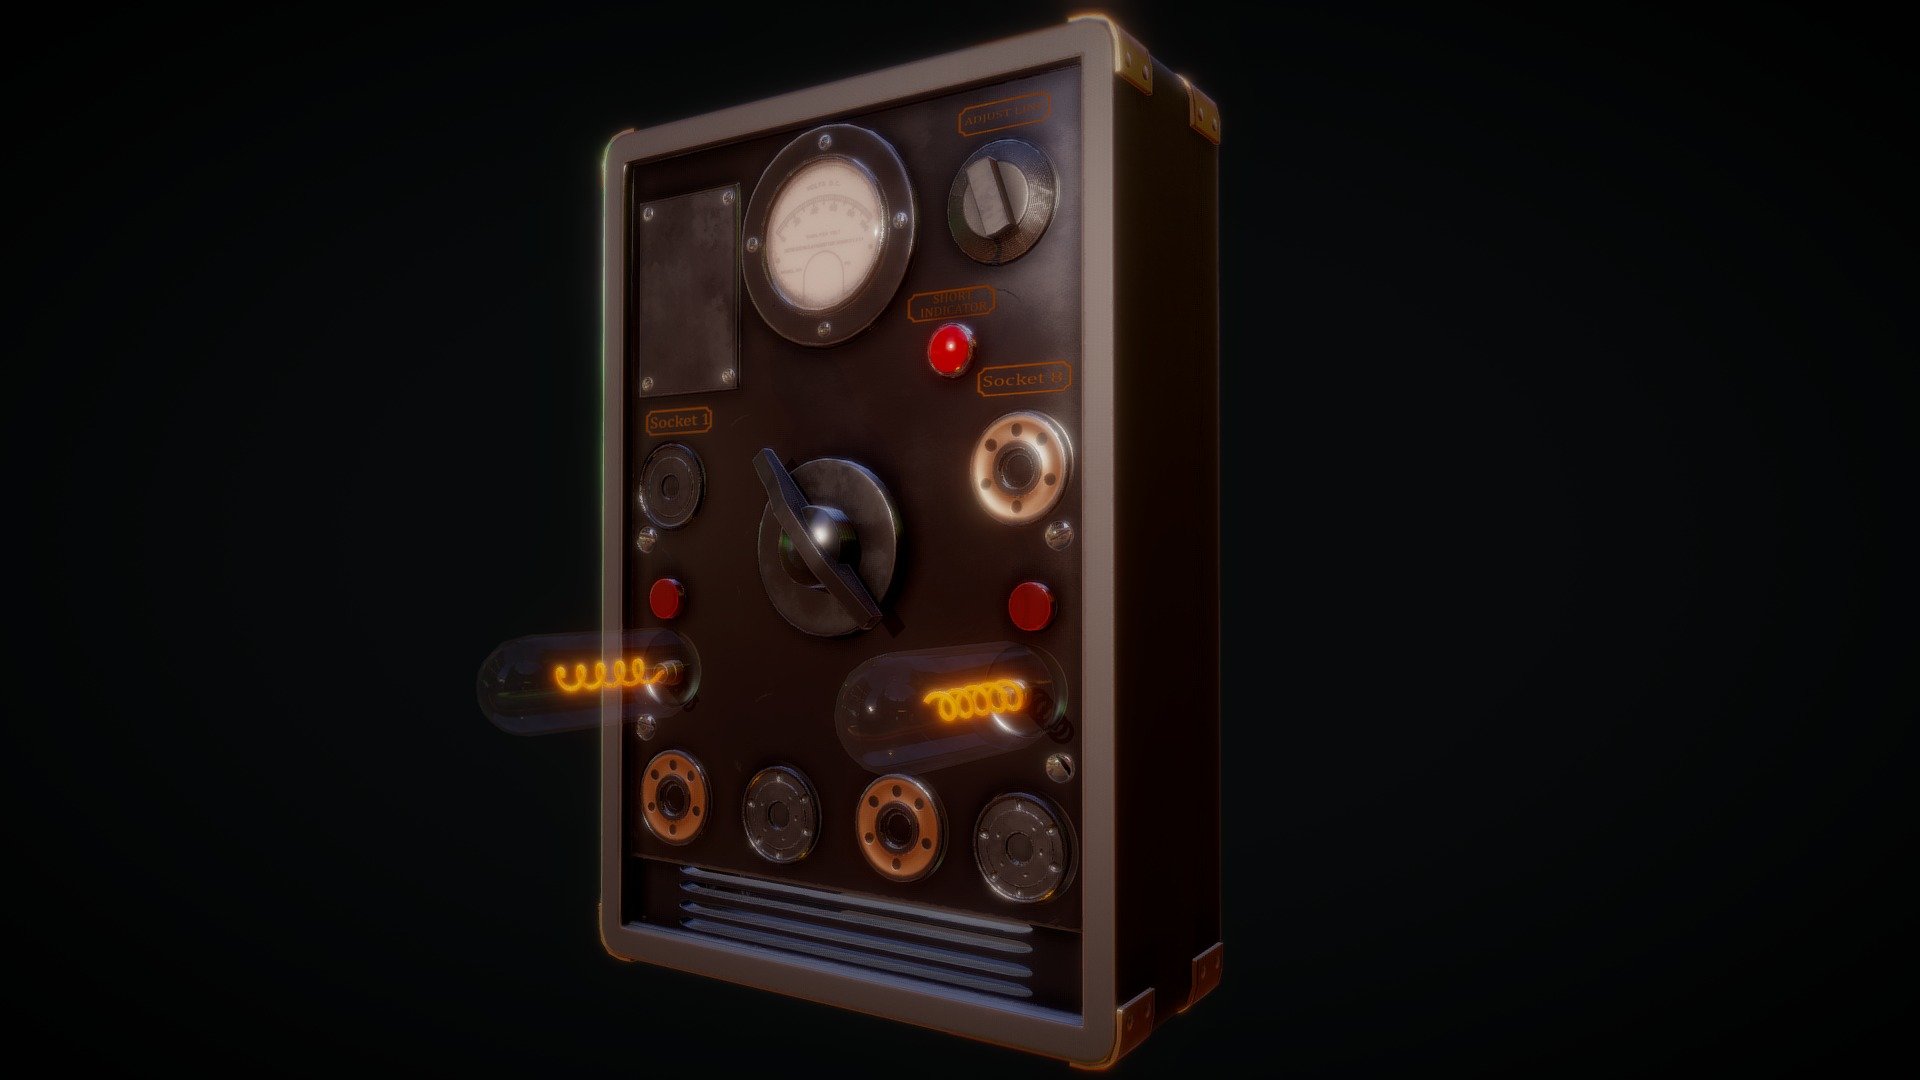 This is a model of an old Tube tester that i found searching for my next project to undertake. I Really liked the aesthetics of the real world counterpart of this item. I'm always looking to challenge myself and attempted to mantain the realism with the textures of this model. Any critical feedback is welcomed as im always striving to improve in all aspects!. The model was made in 3dsmax and textured in photoshop! 3d model